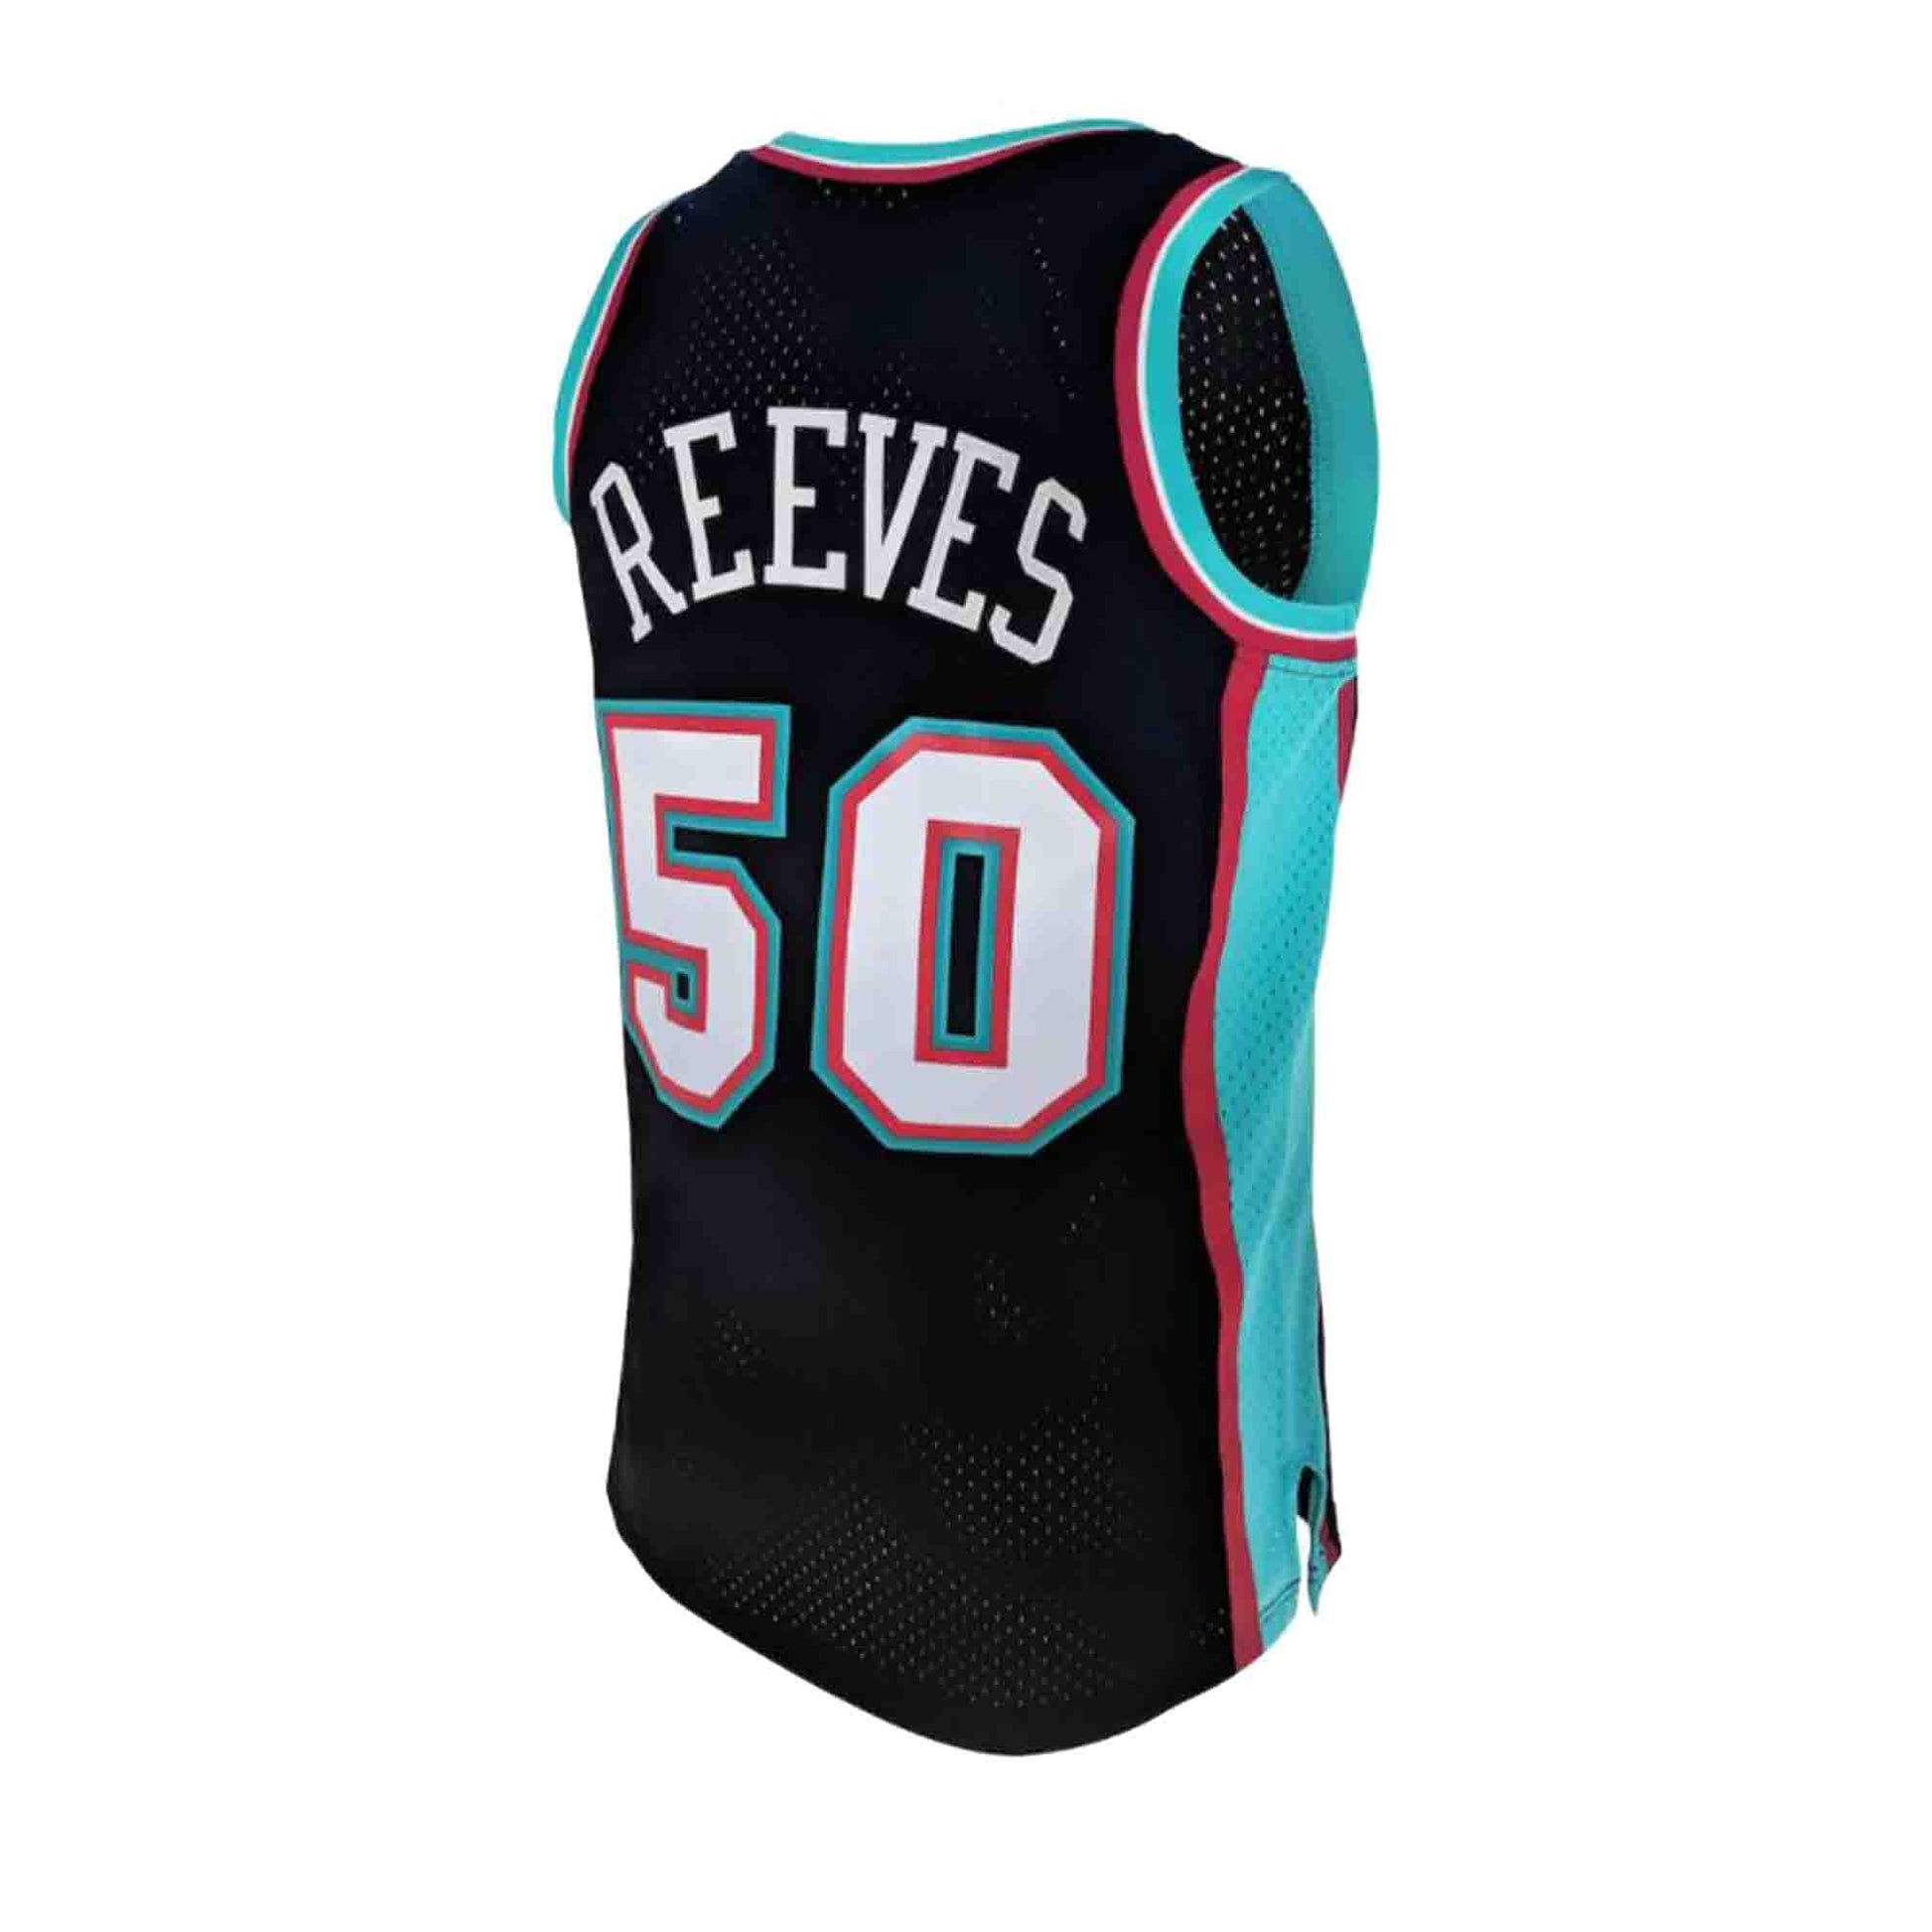 VINTAGE CHAMPION VANCOUVER GRIZZLIES BRYANT REEVES SIGNED JERSEY